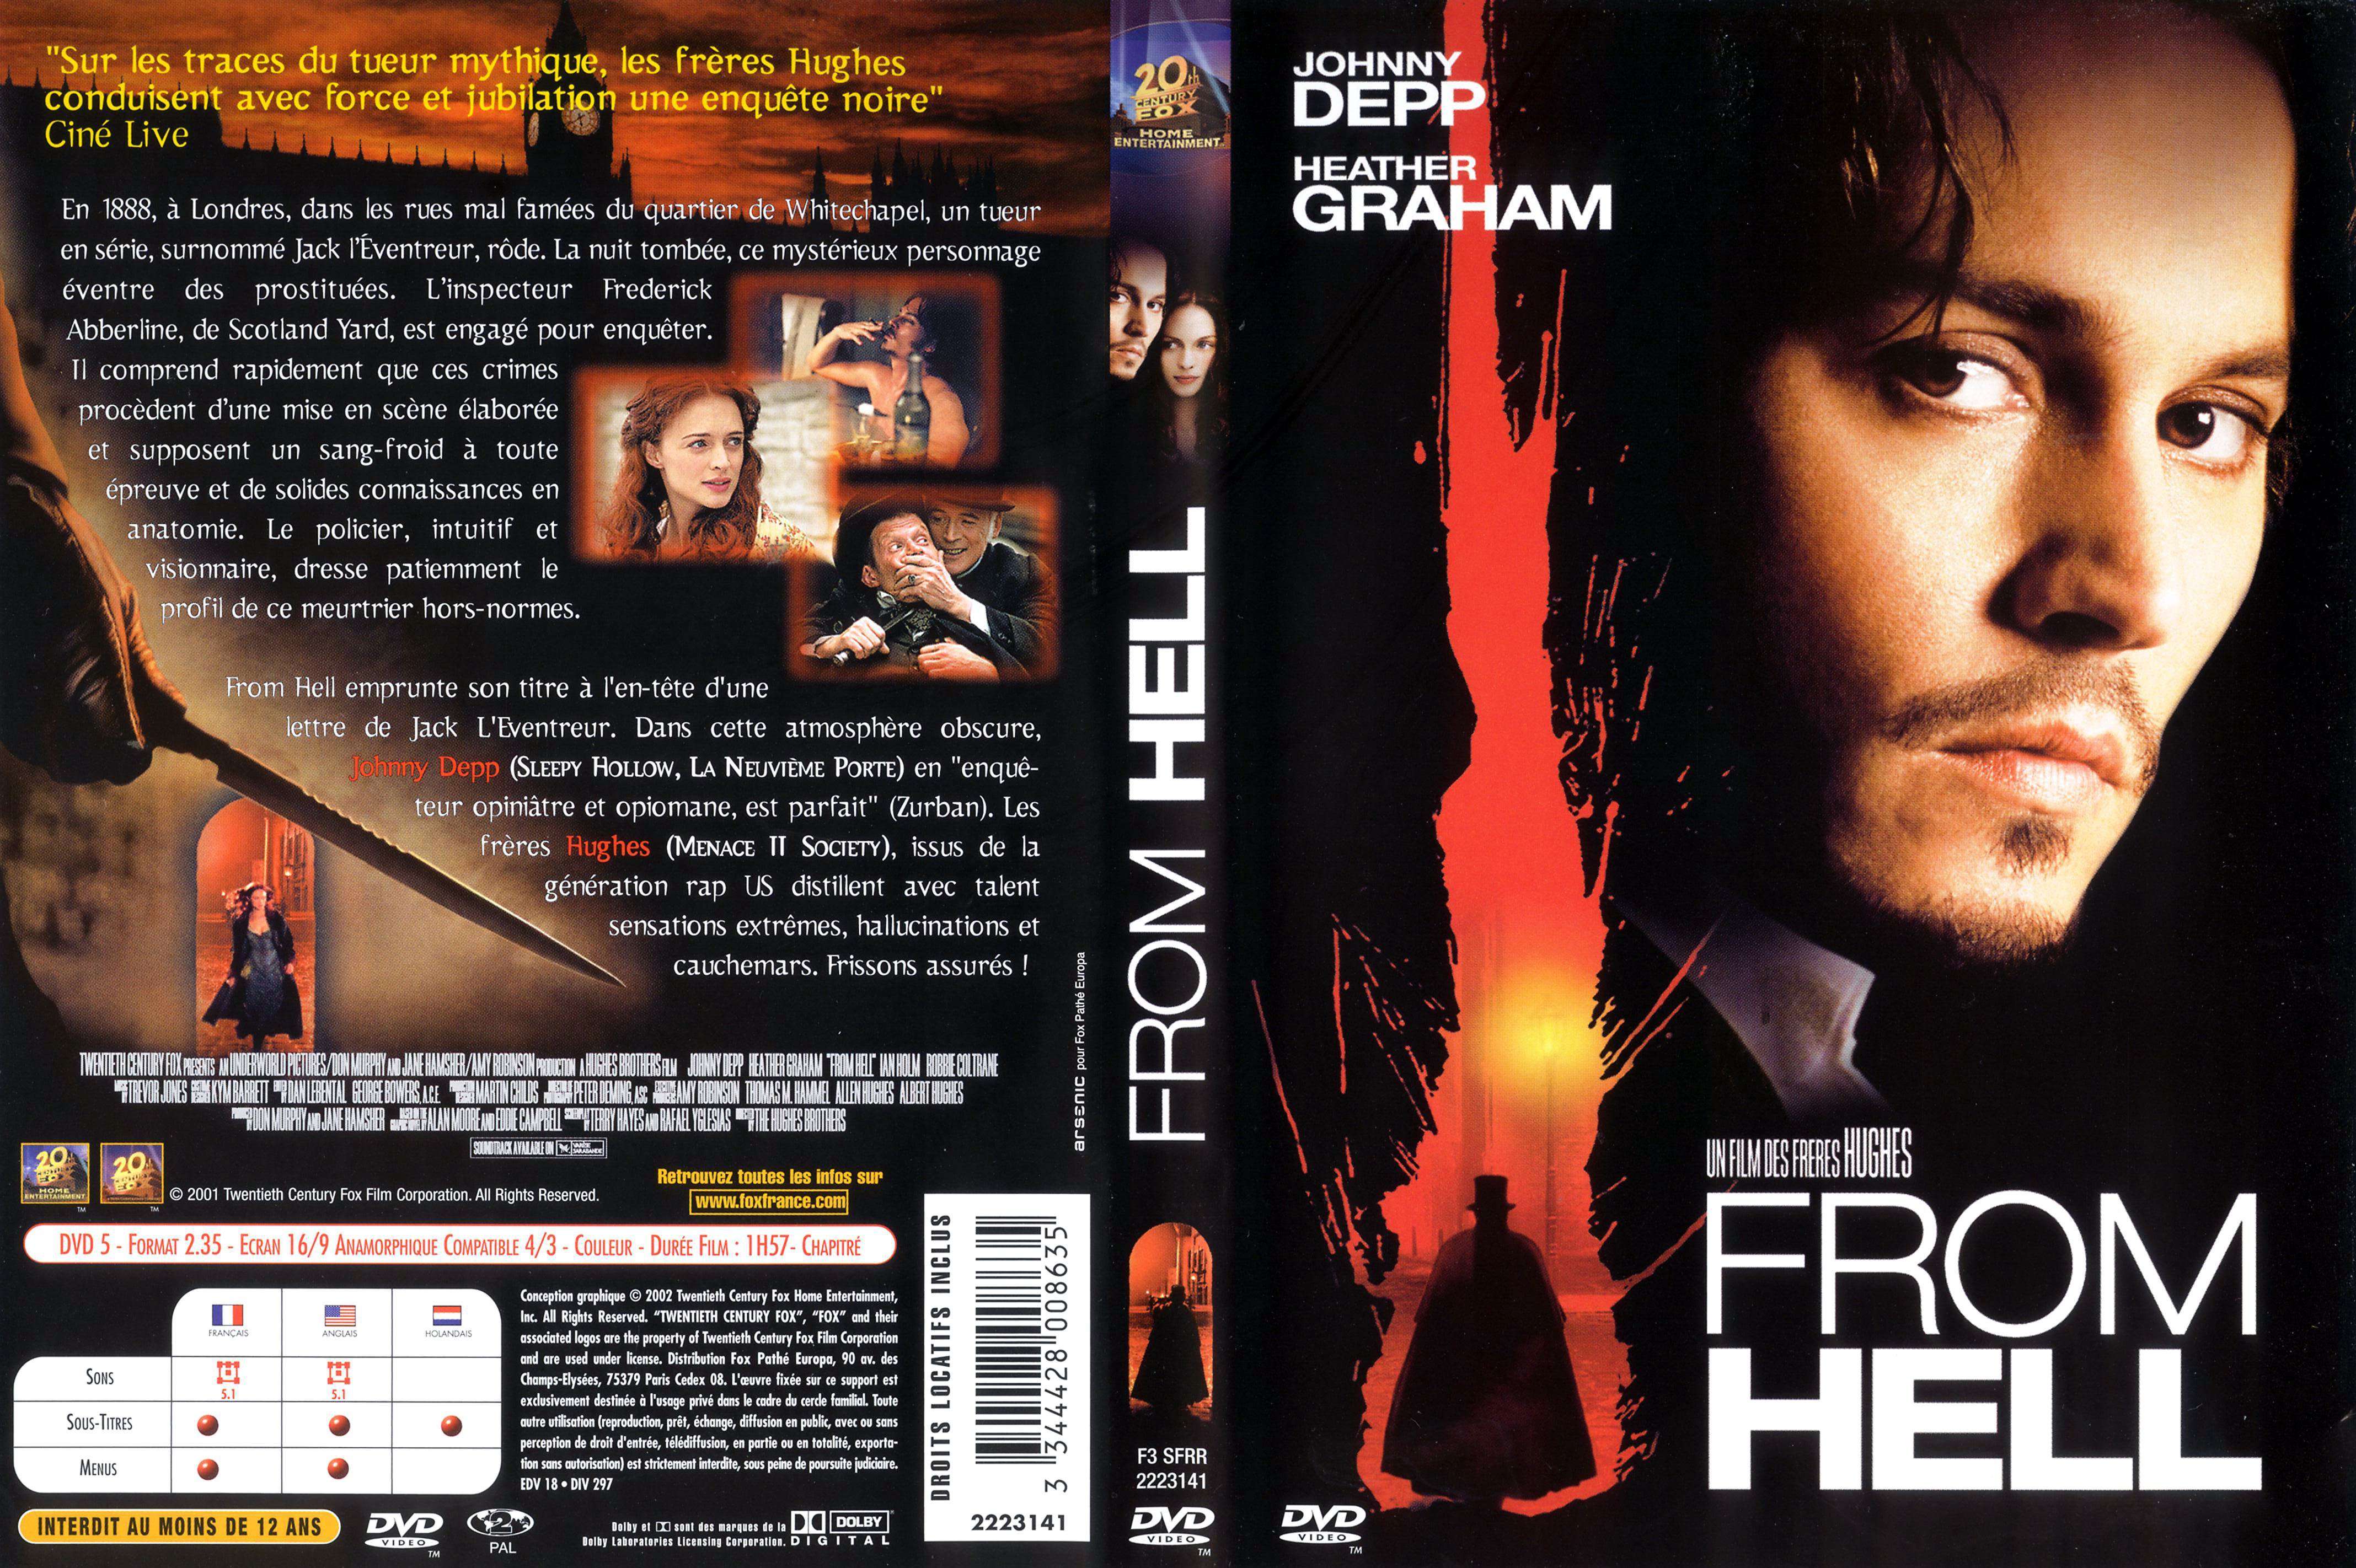 Jaquette DVD From hell v3